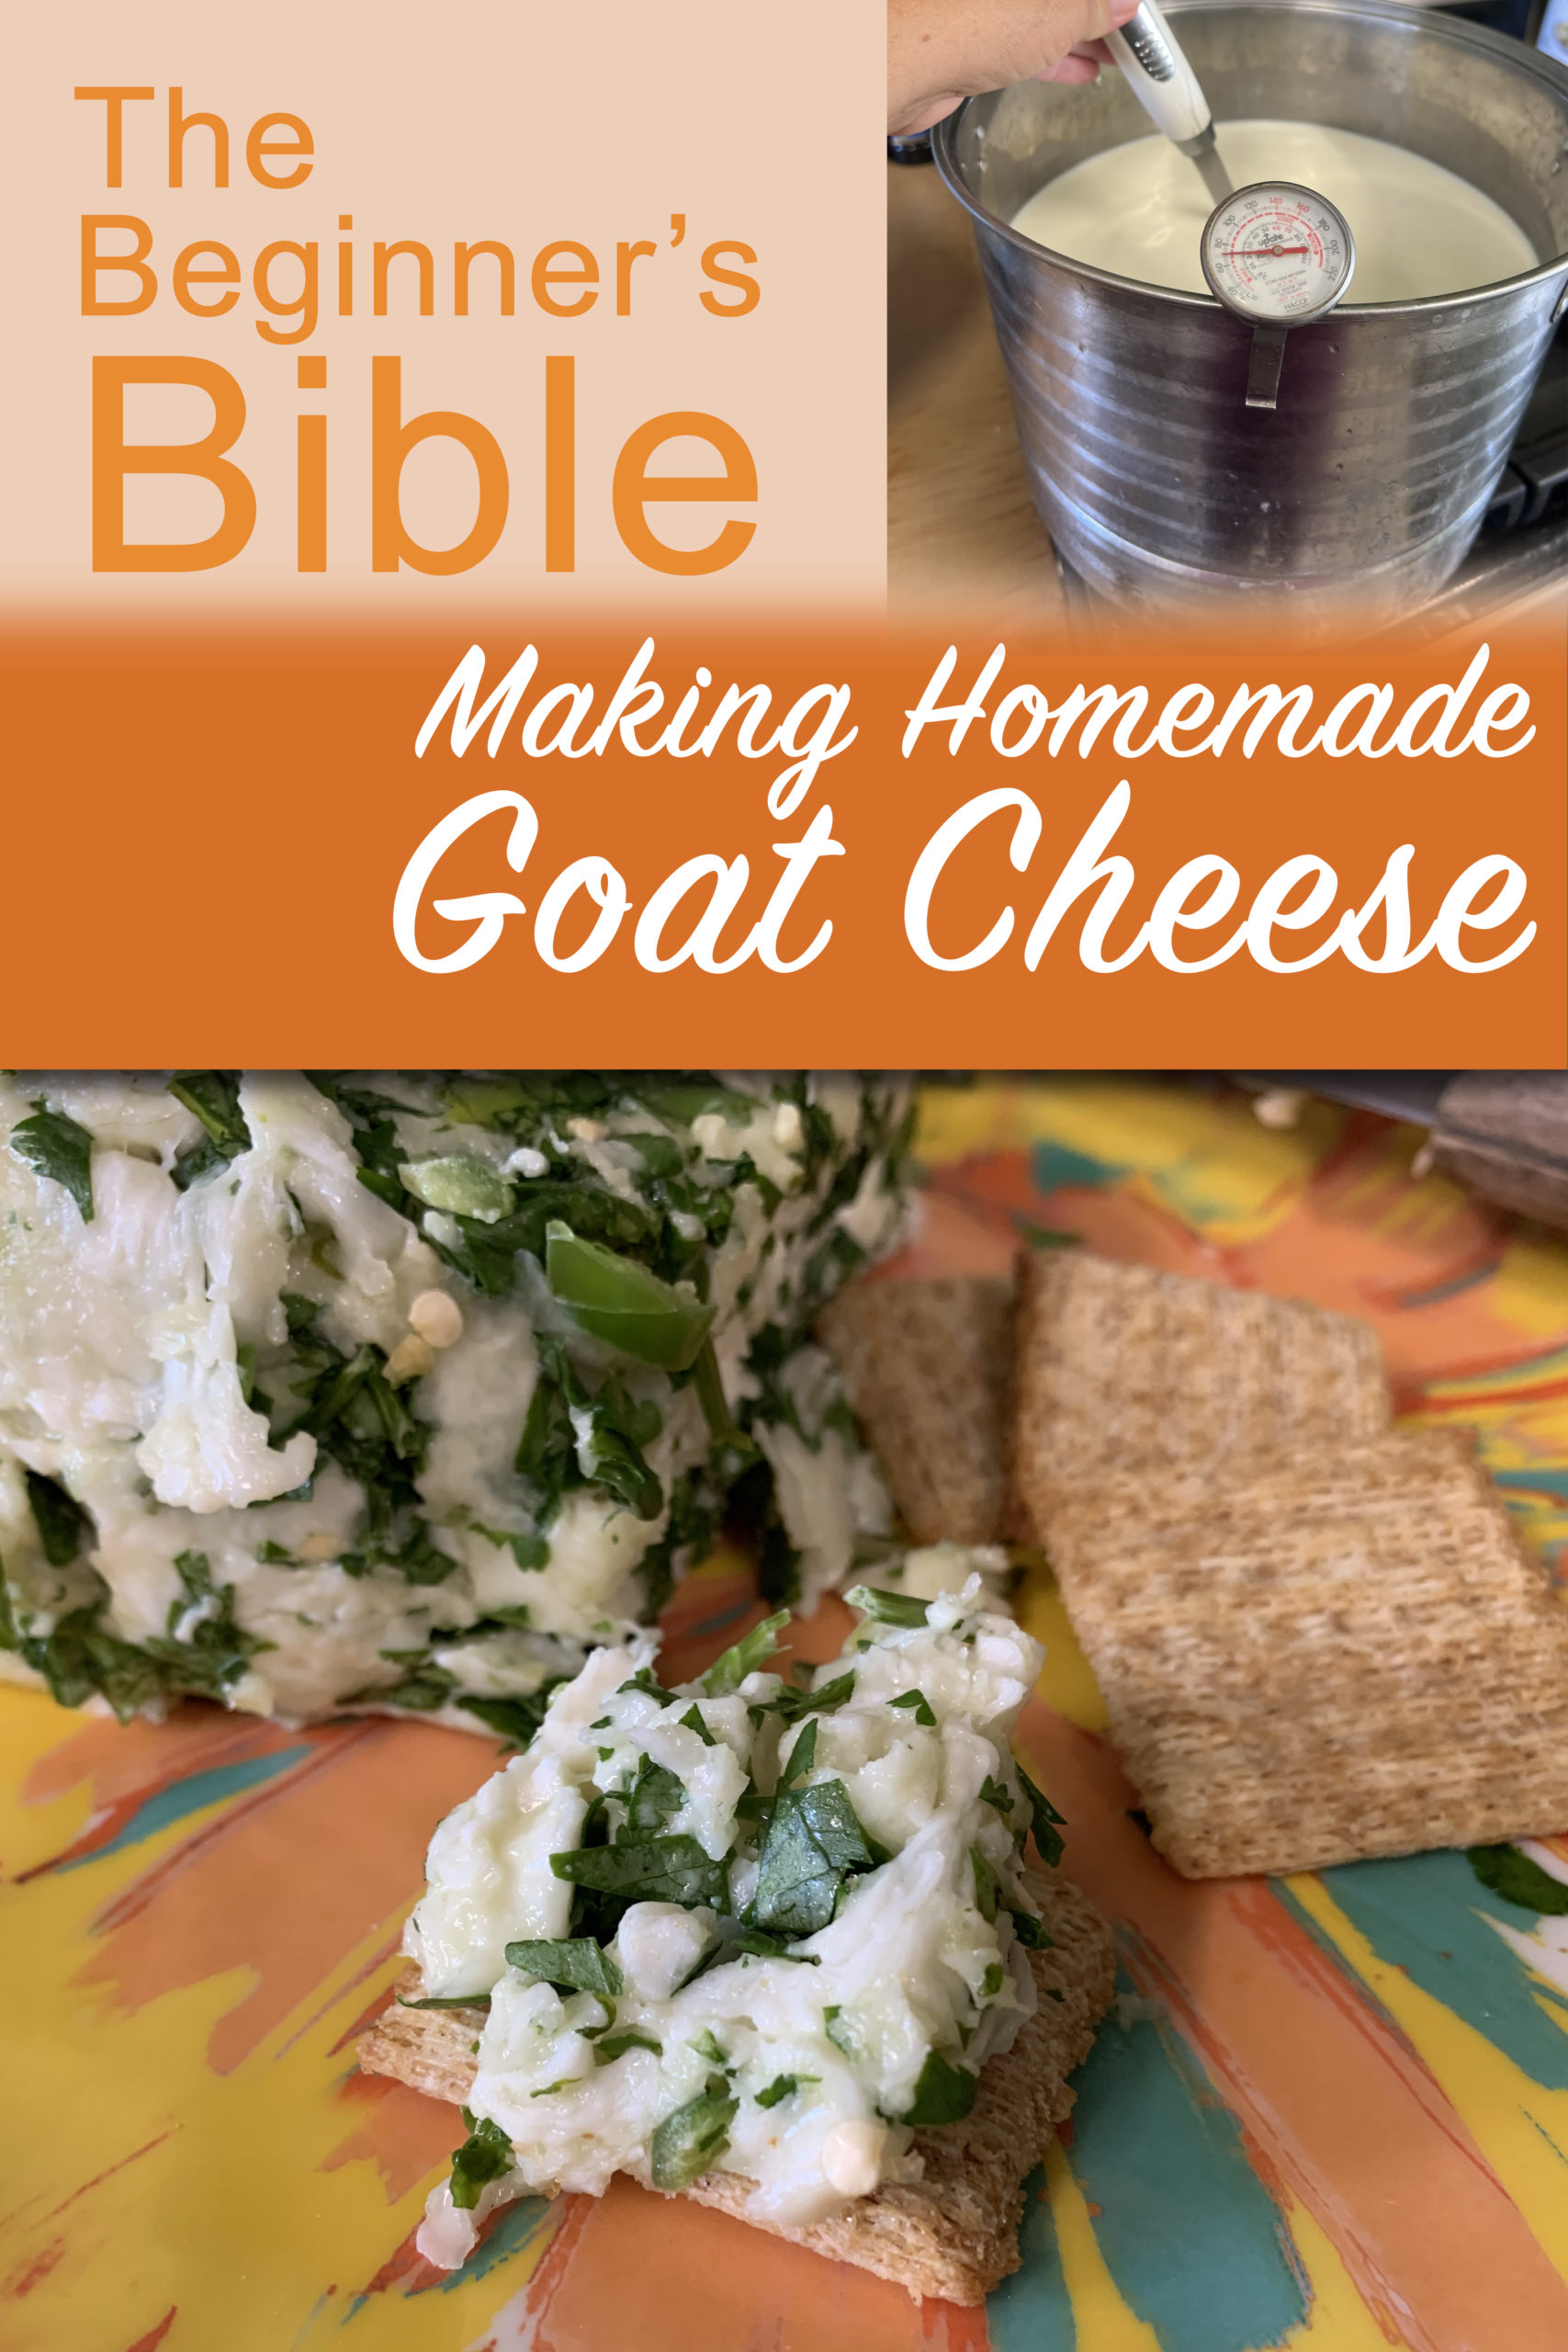 Making Goat Cheese: A Beginner’s Guide